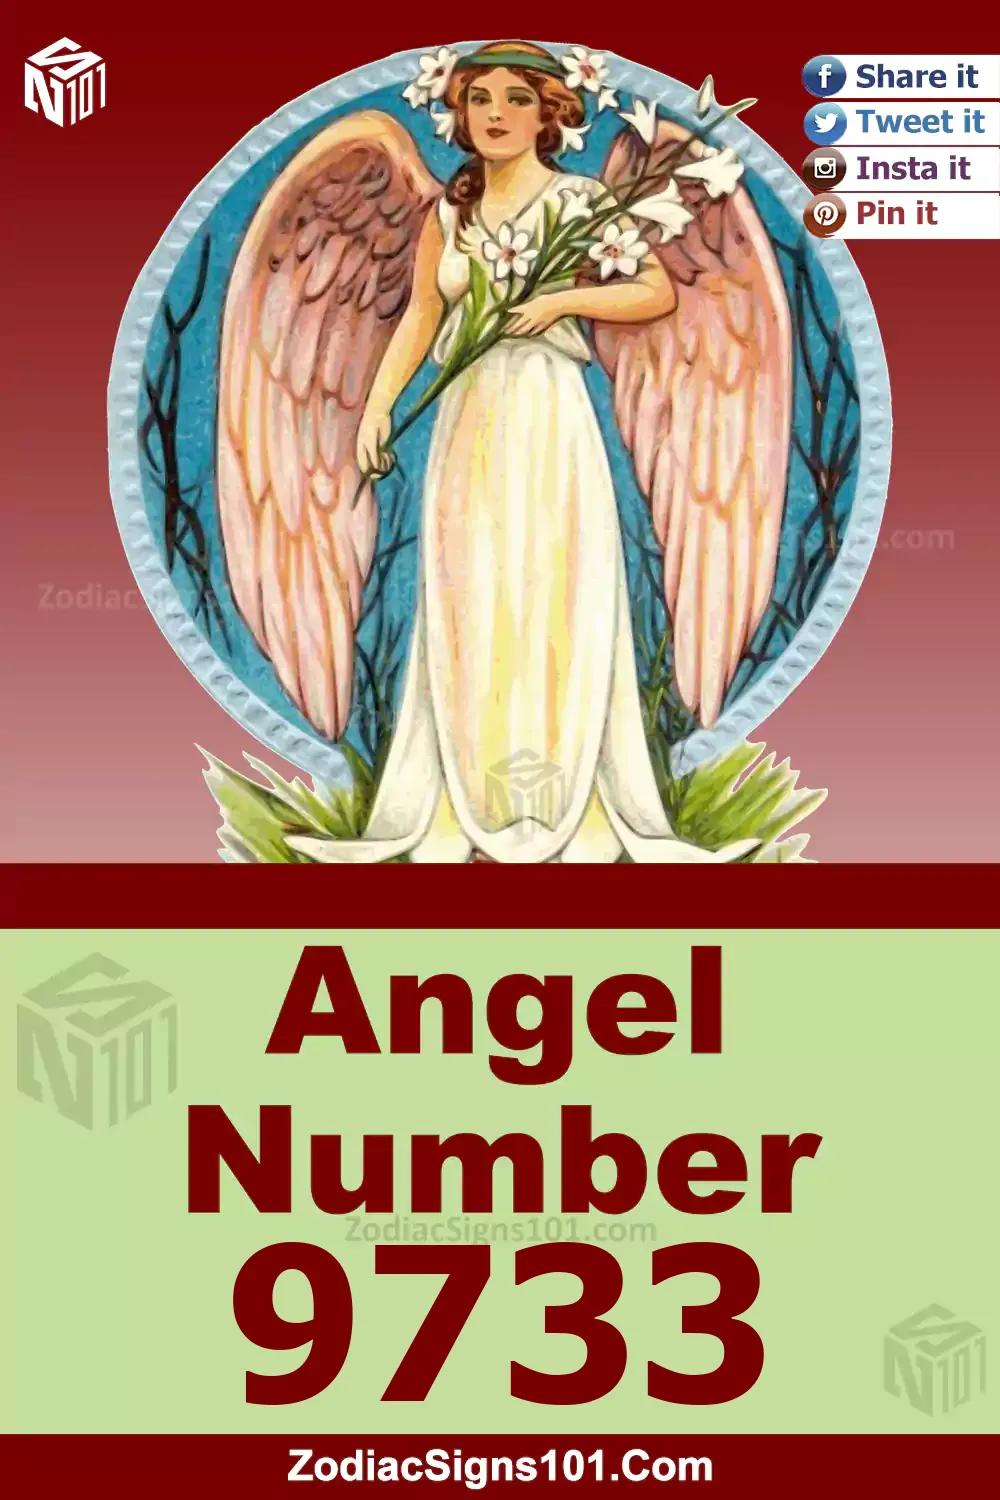 9733 Angel Number Meaning